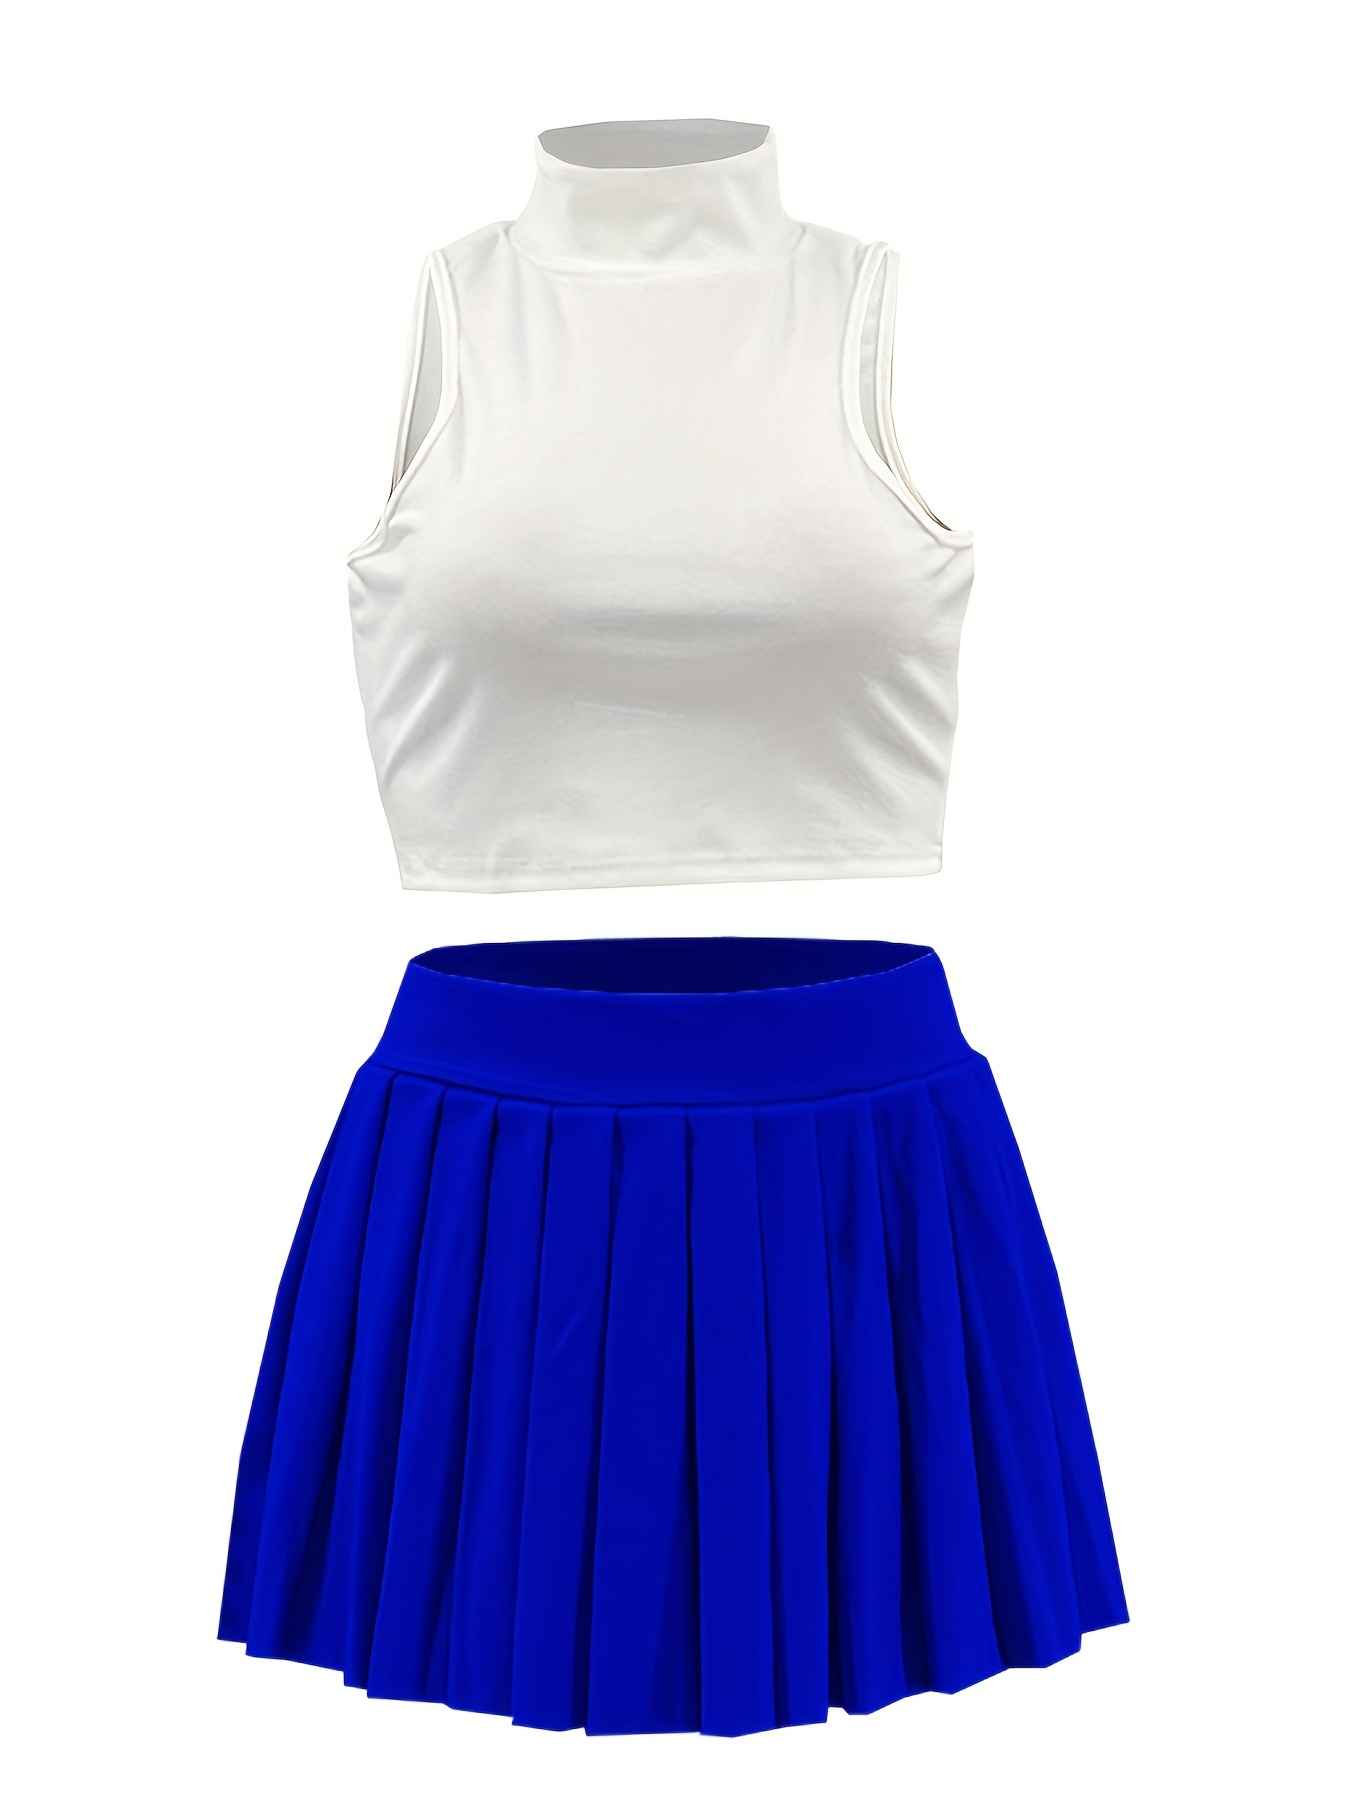  acelyn Tennis Skirts Sets Sexy Two Piece Outfits for Women  Summer Sleeveless Zip Crop Tops High Waist Golf Skater Mini Skirt  Clubwear,Blue,M : Clothing, Shoes & Jewelry